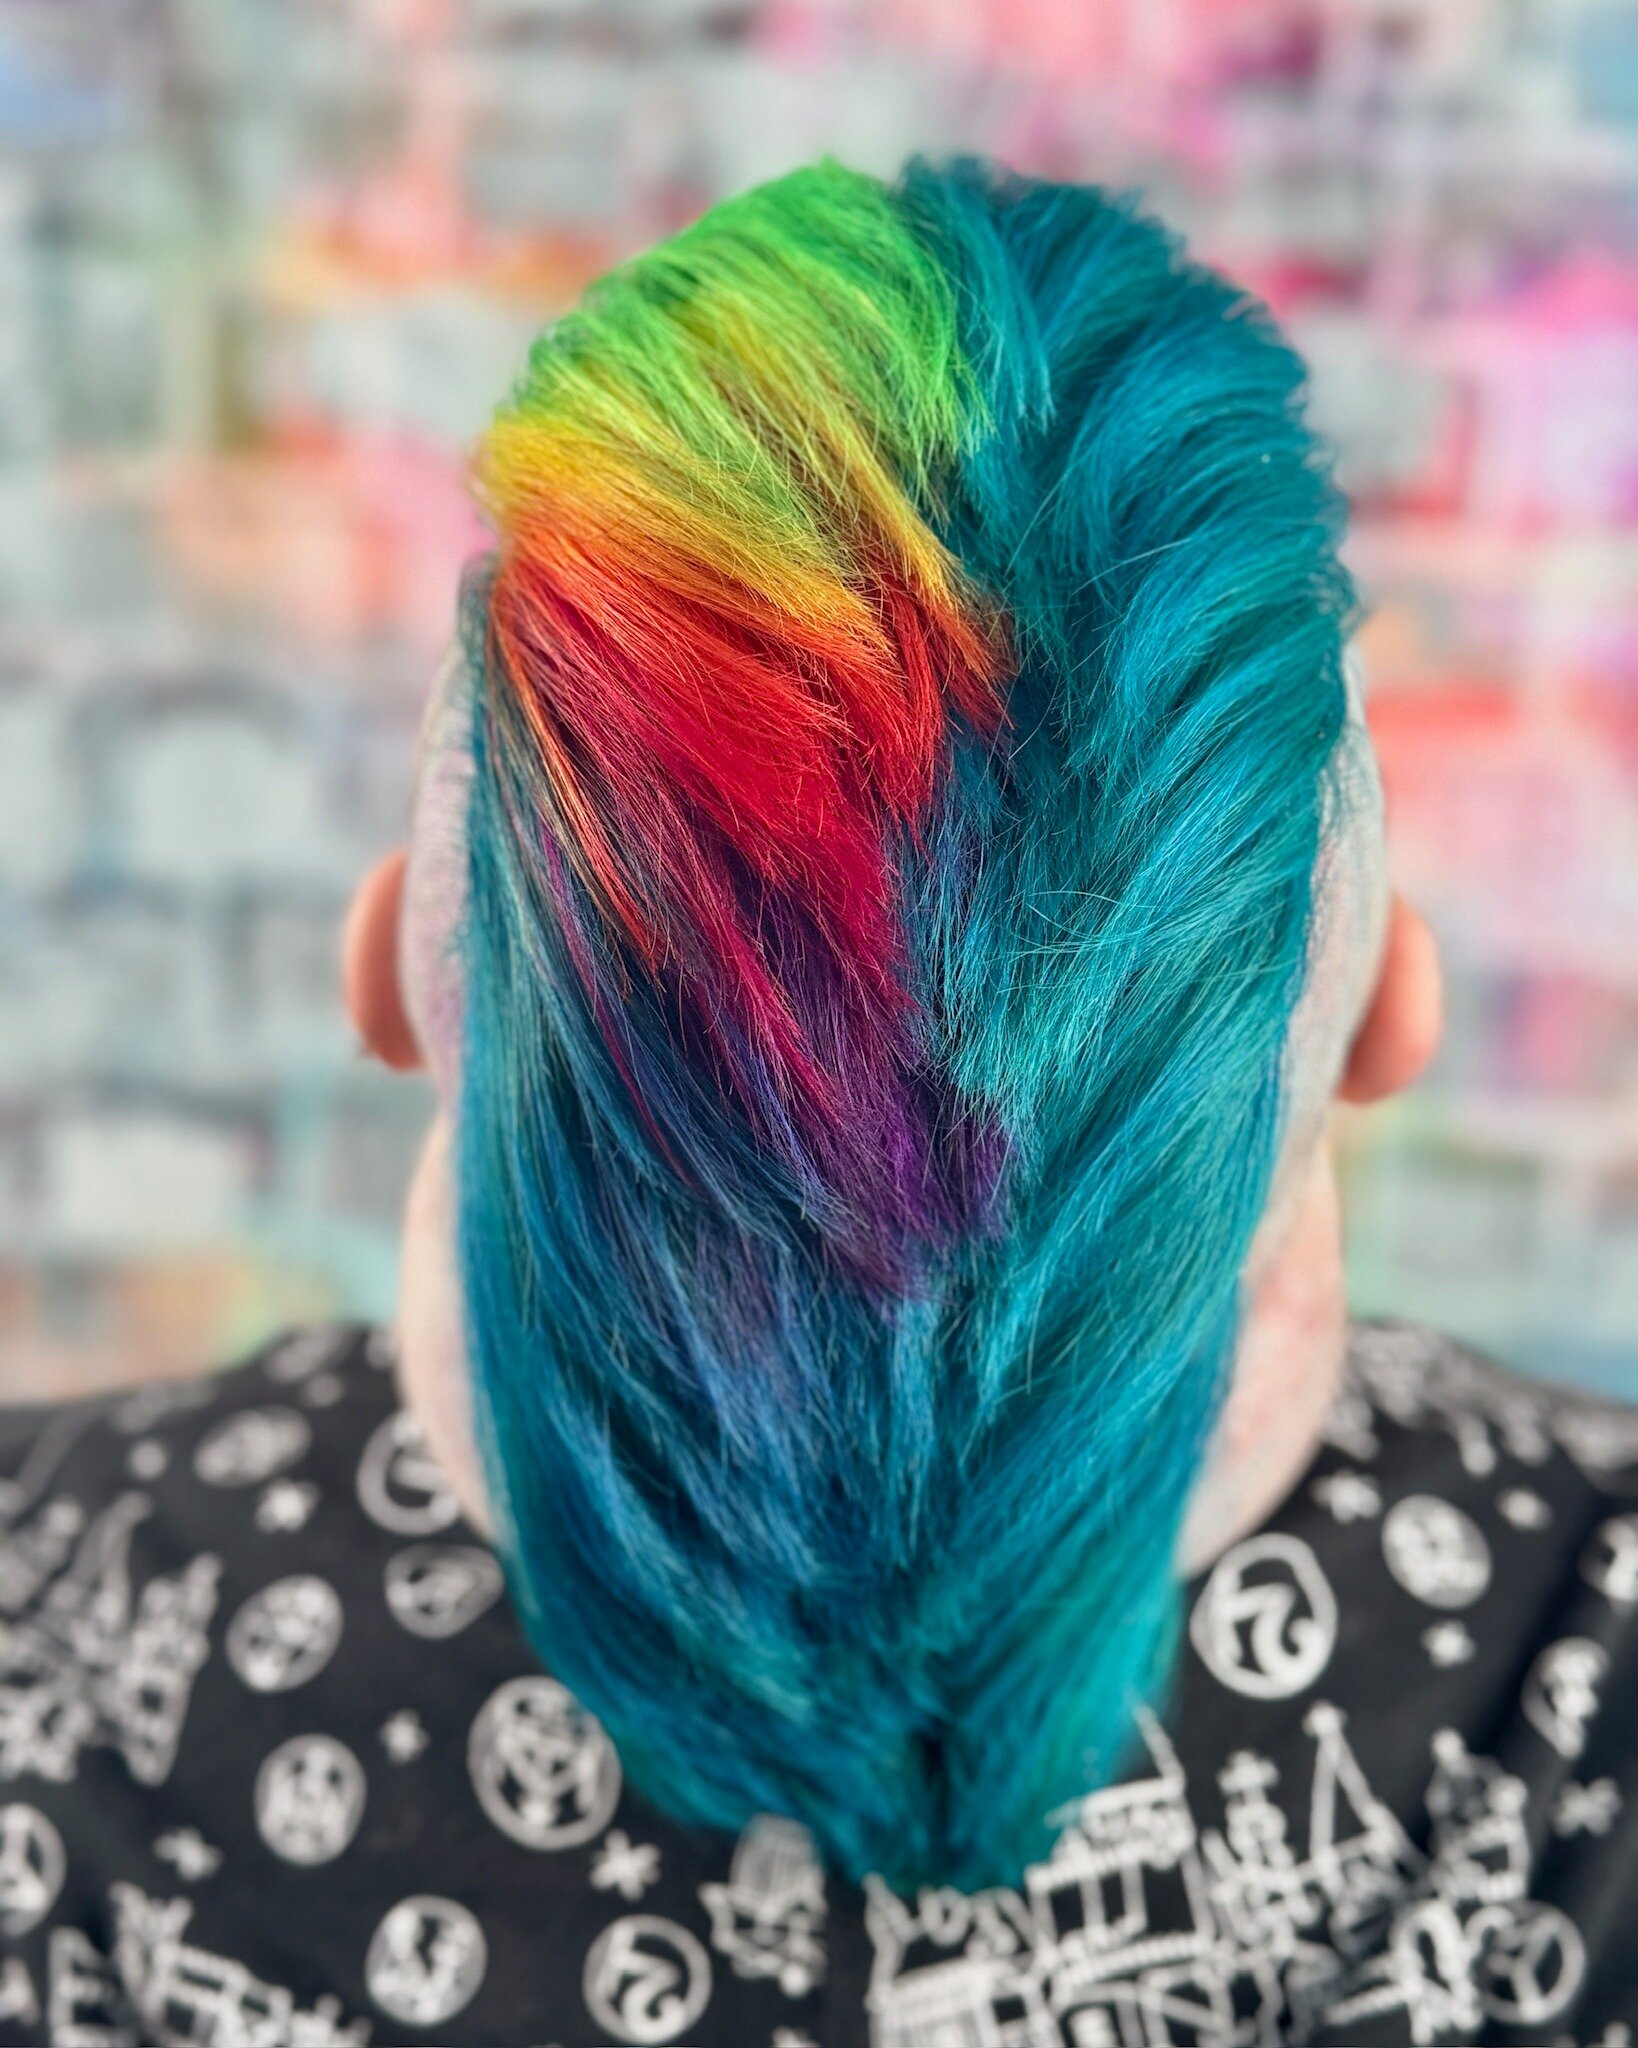 ✨🌈 Rainbow Revival 🌈✨

✨Welcome back Danni, whose spirit is as vibrant as their hair.

✨They&rsquo;ve rekindled the rainbow with a spectrum of colour, each strand declaration of their individuality.

✨Ya know how some people just turn up in your li